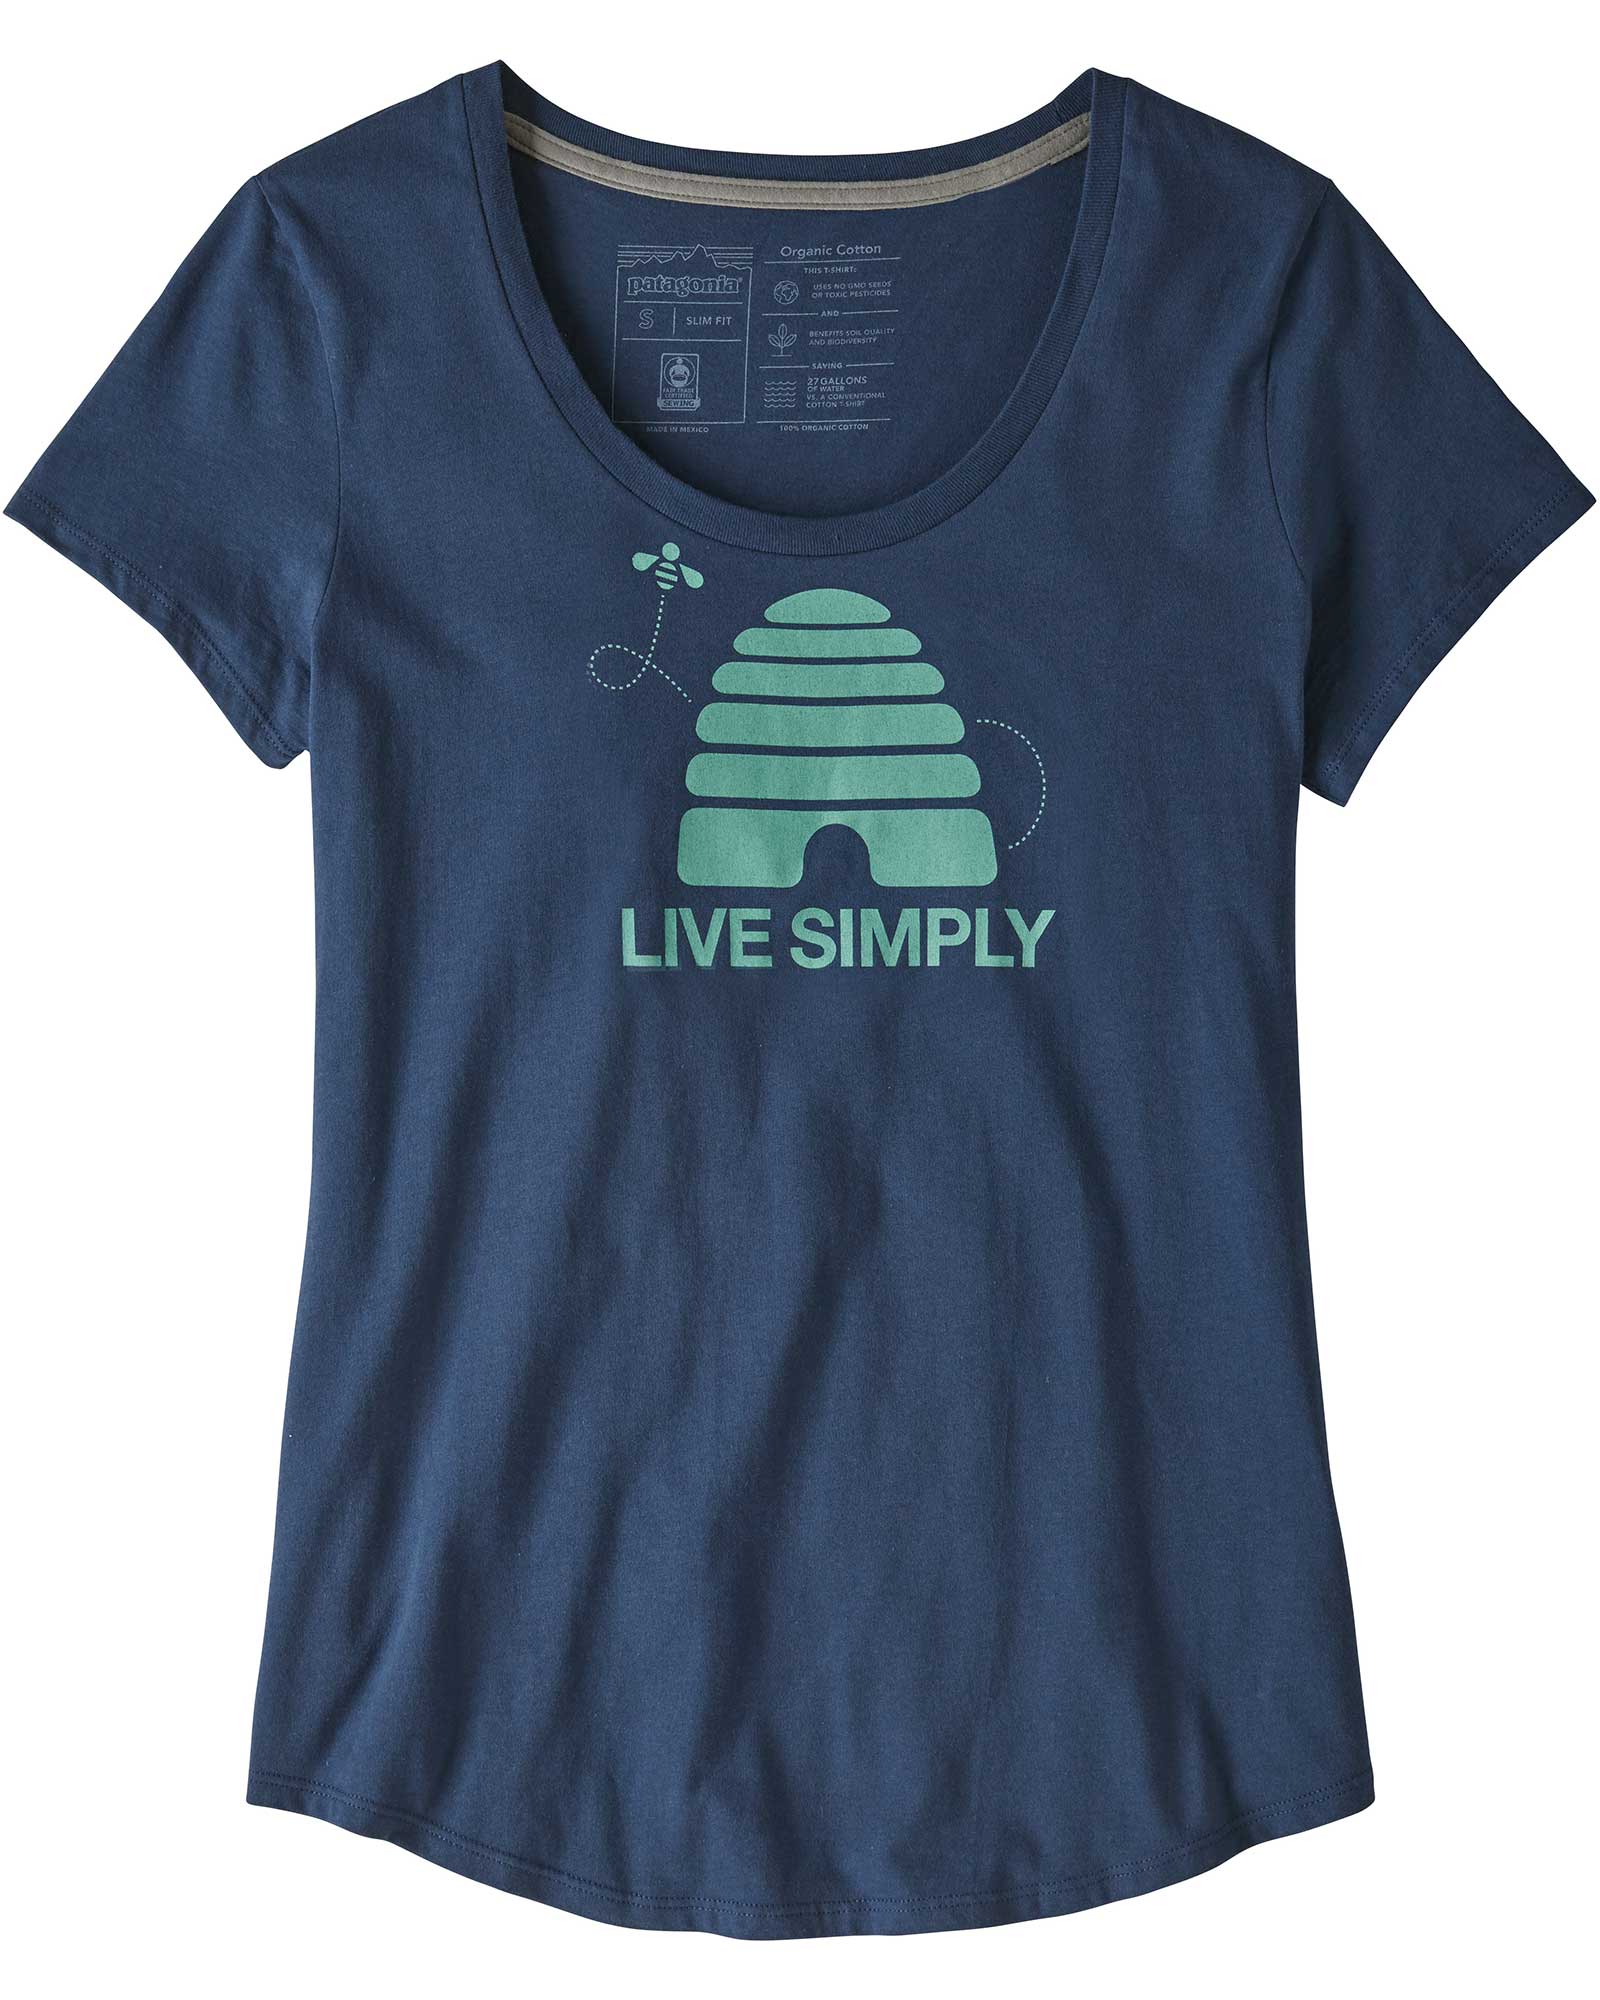 Product image of Patagonia Live Simply Hive Organic Women's Scoop T-Shirt